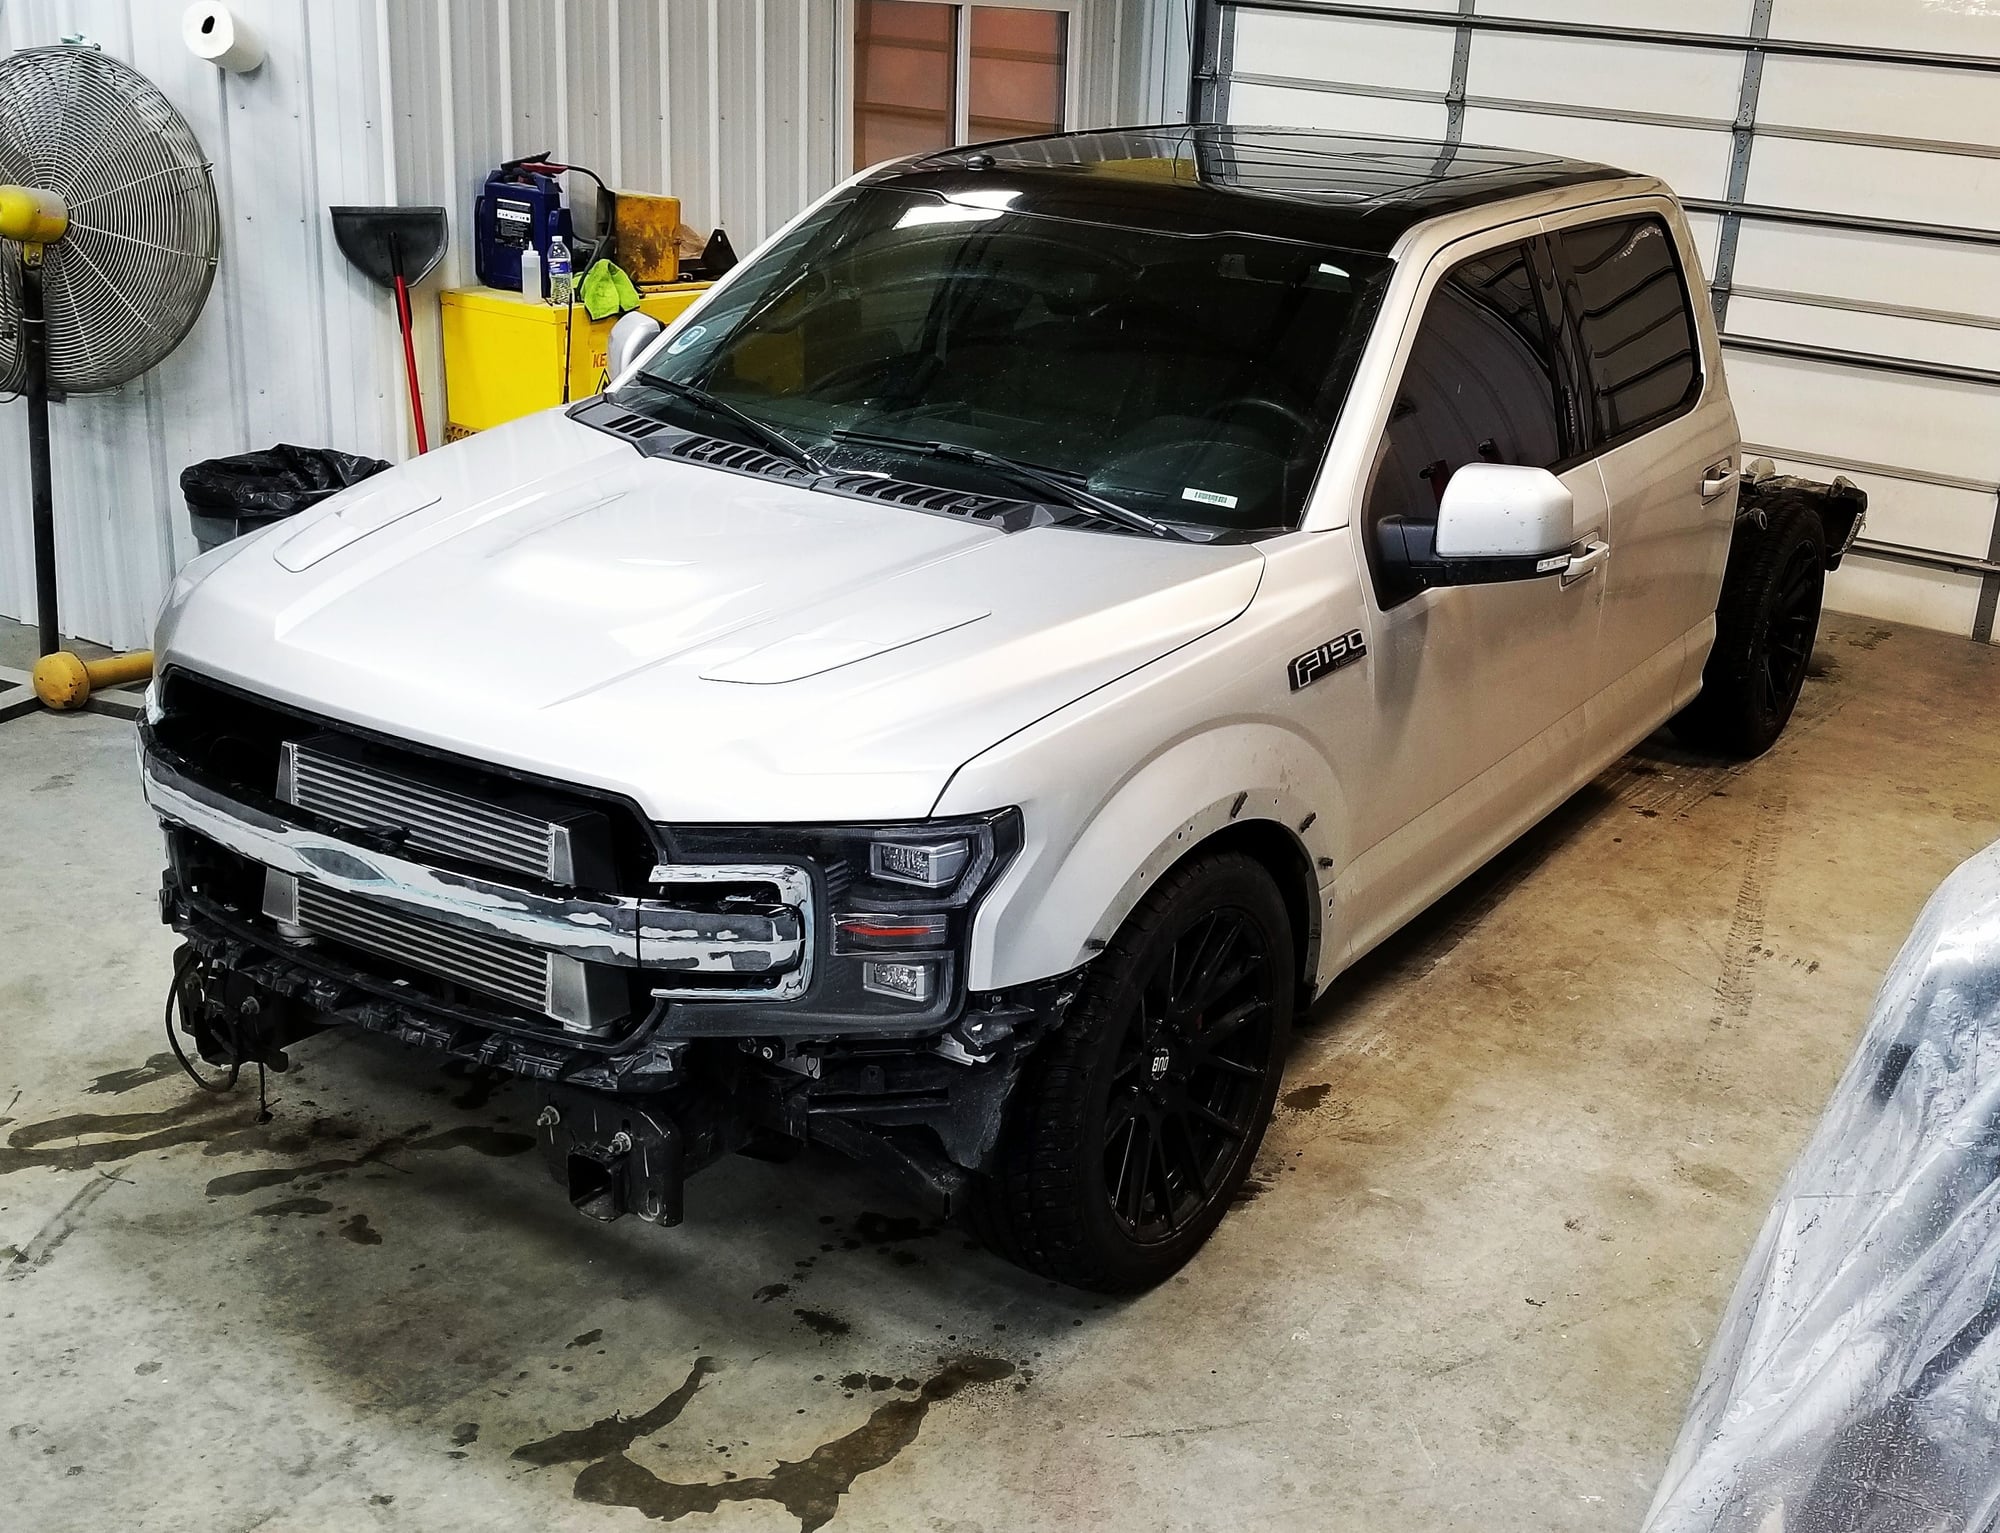 Official 2018 Grille Replacement Thread - Page 47 - Ford F150 Forum